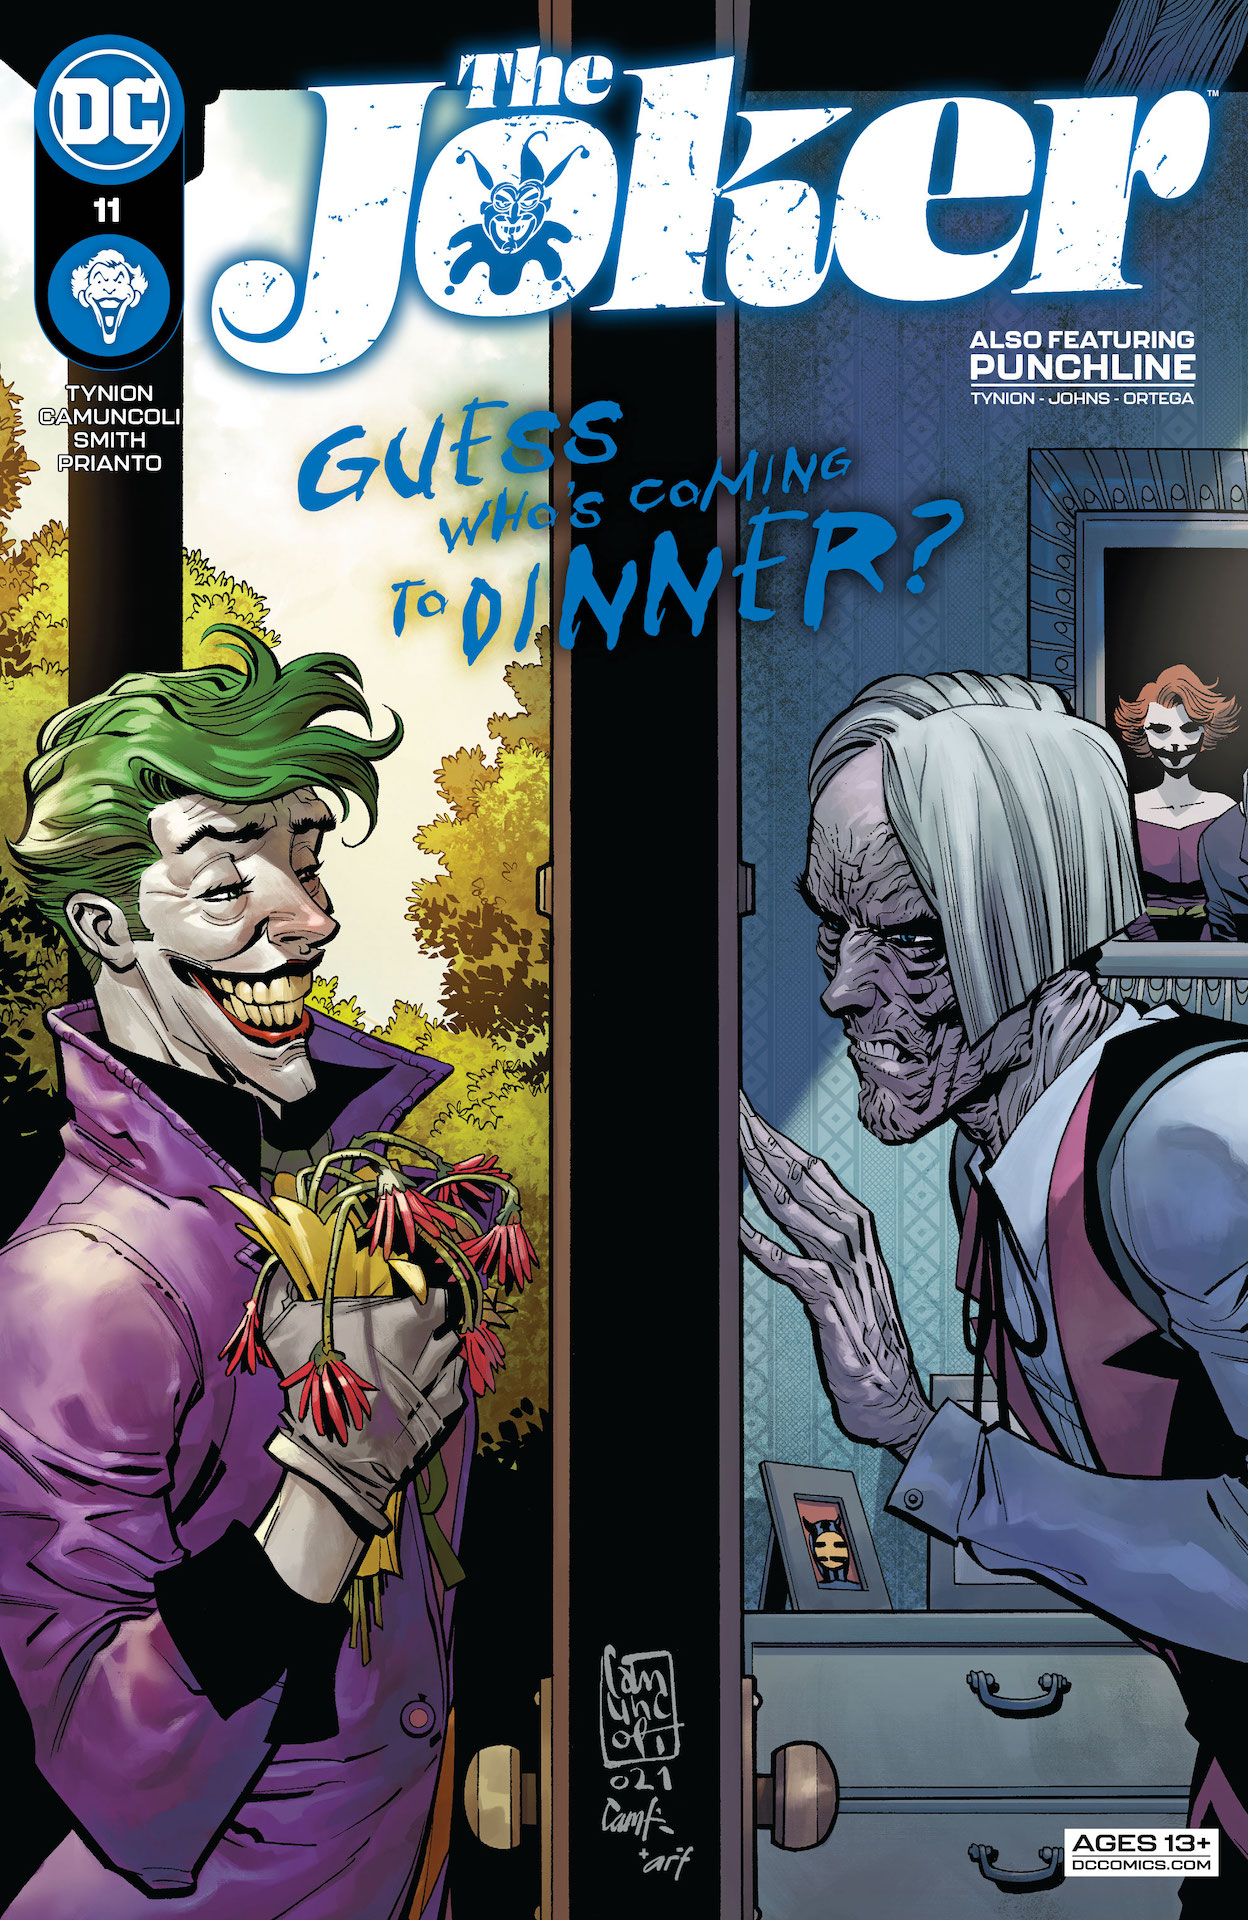 DC Preview: The Joker #11